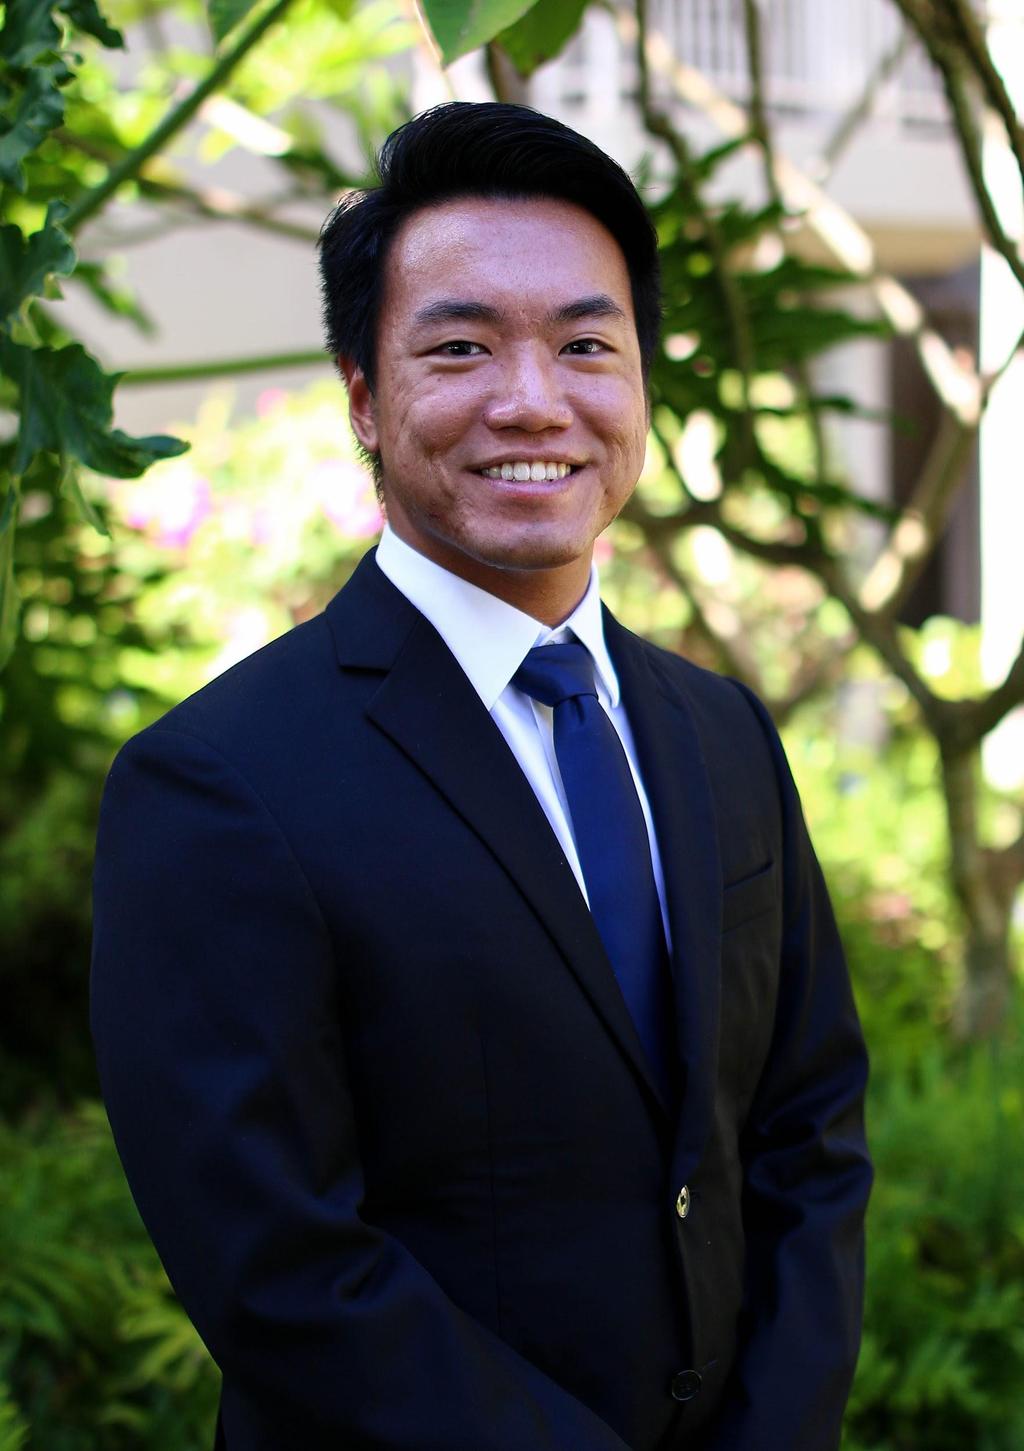 Hey AC! My name is Brandon Wang, and I am very excited to be serving as your IBC enator for the semester!